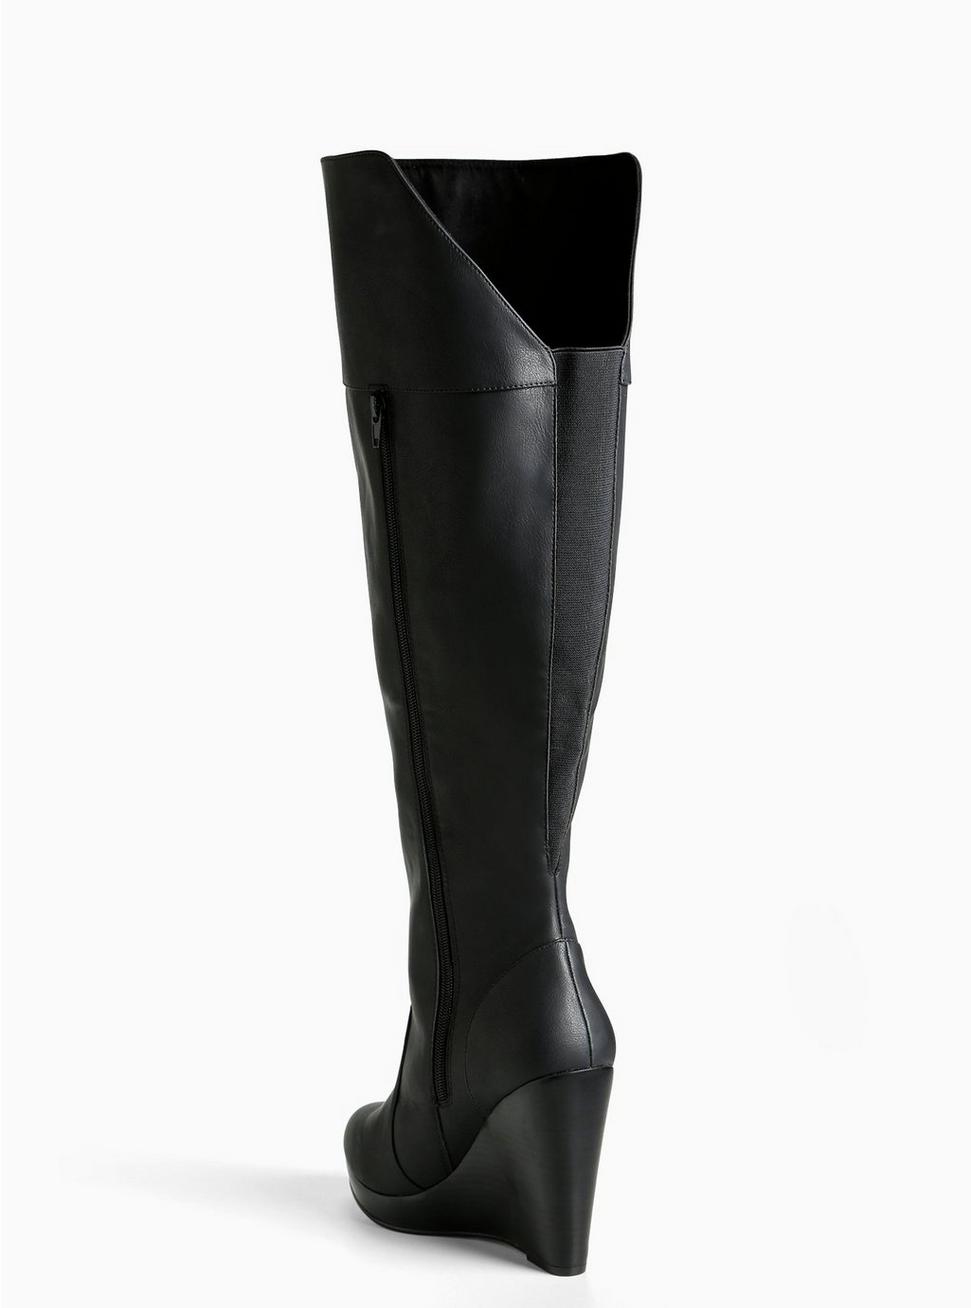 Plus Size - Over the Knee Wedge Boots (Wide Width & Wide Calf) - Torrid